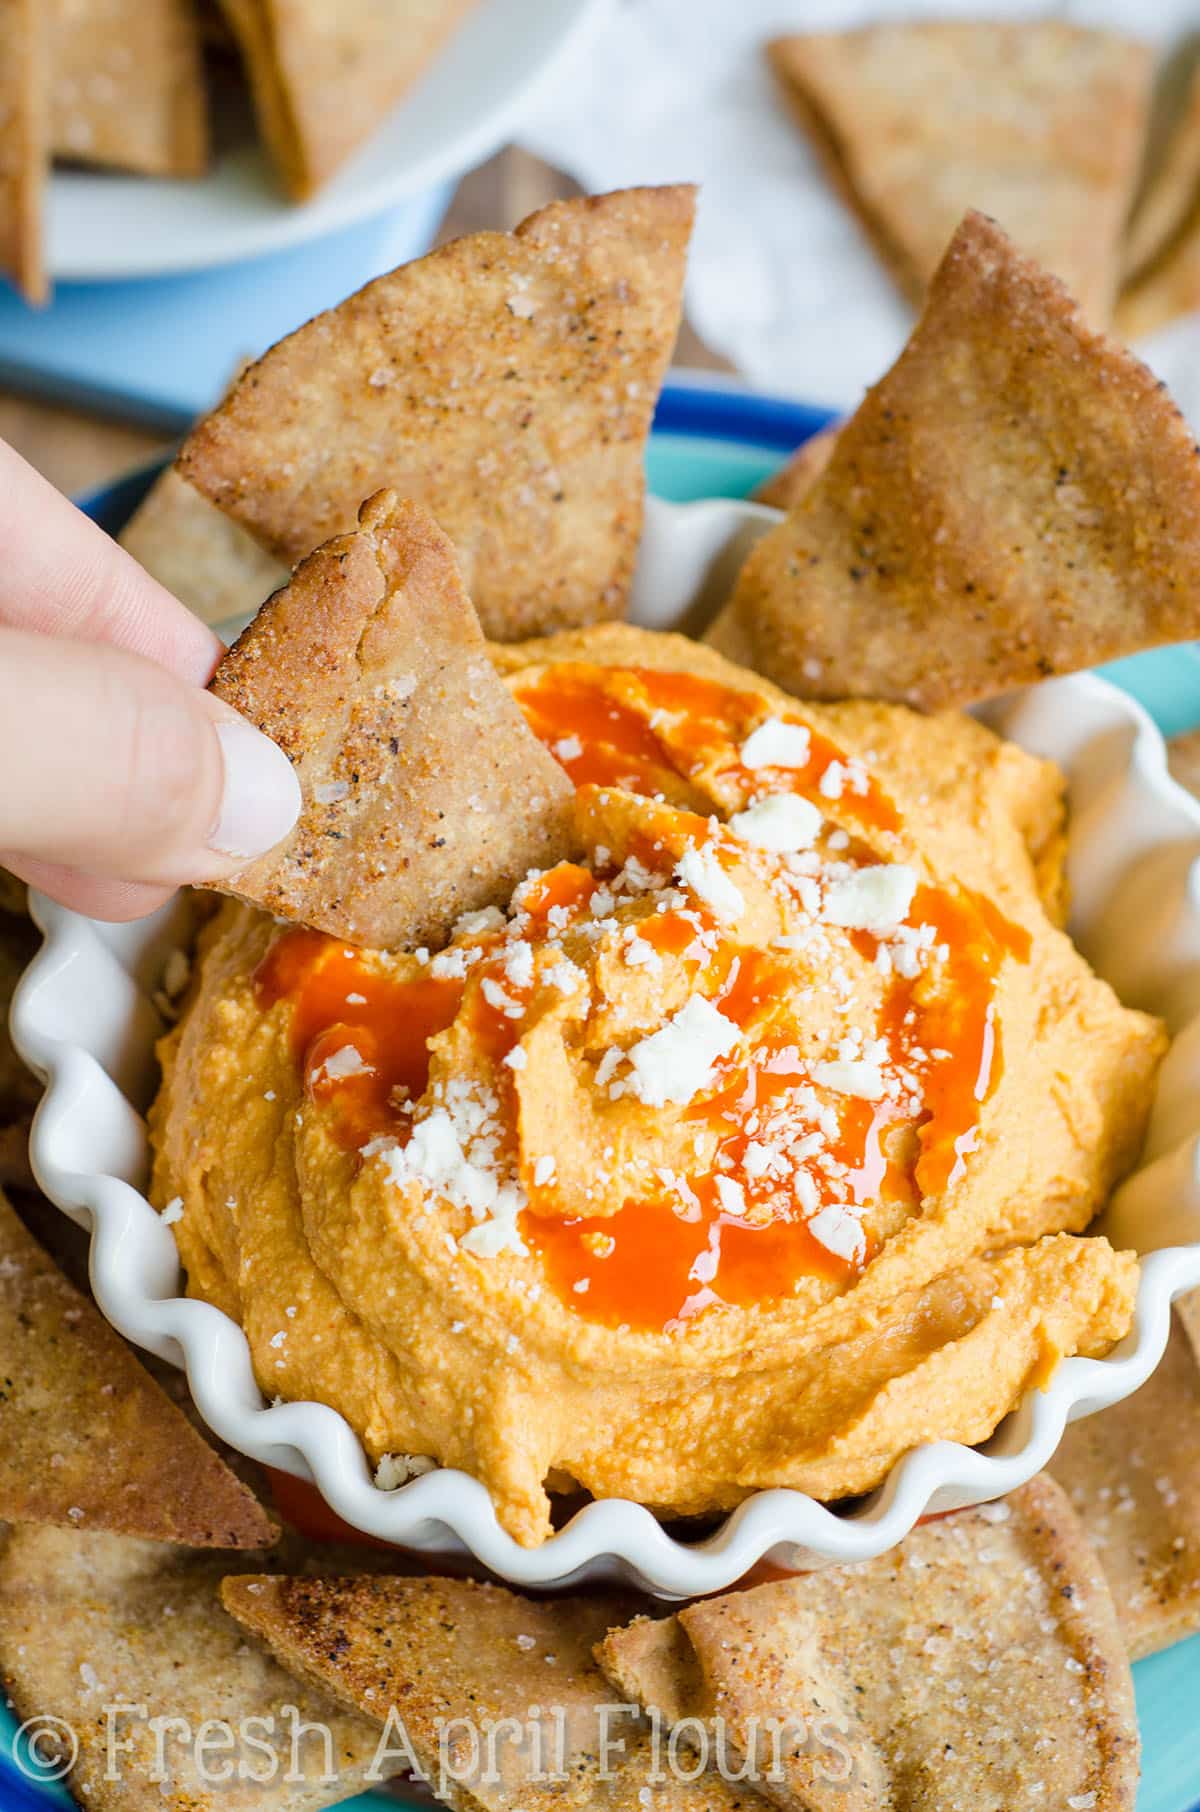 A bowl of creamy buffalo hummus on a plate with pita chips around it. A hand is dipping a pita chip into the hummus.